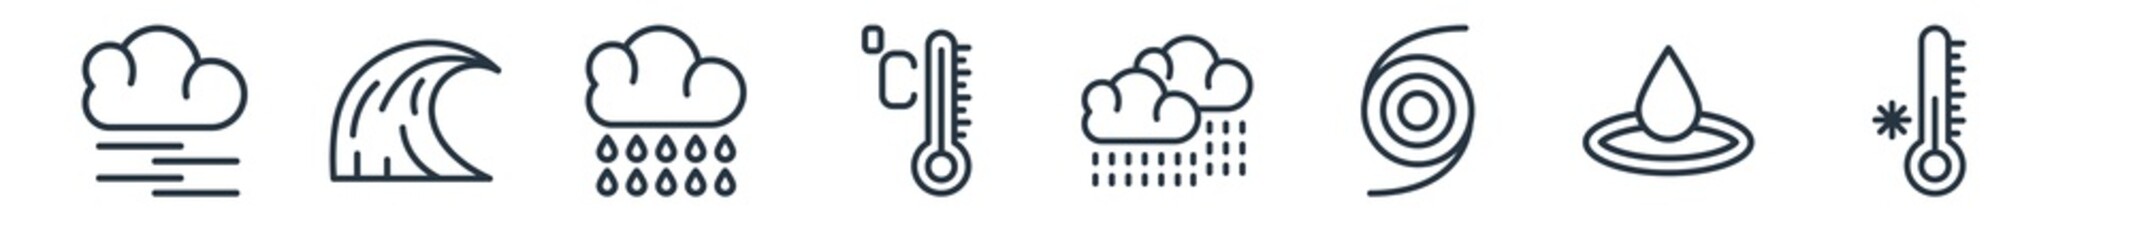 linear set of weather outline icons. line vector icons such as mist, tsunami, rainy day, degree, steady rain, cold vector illustration.